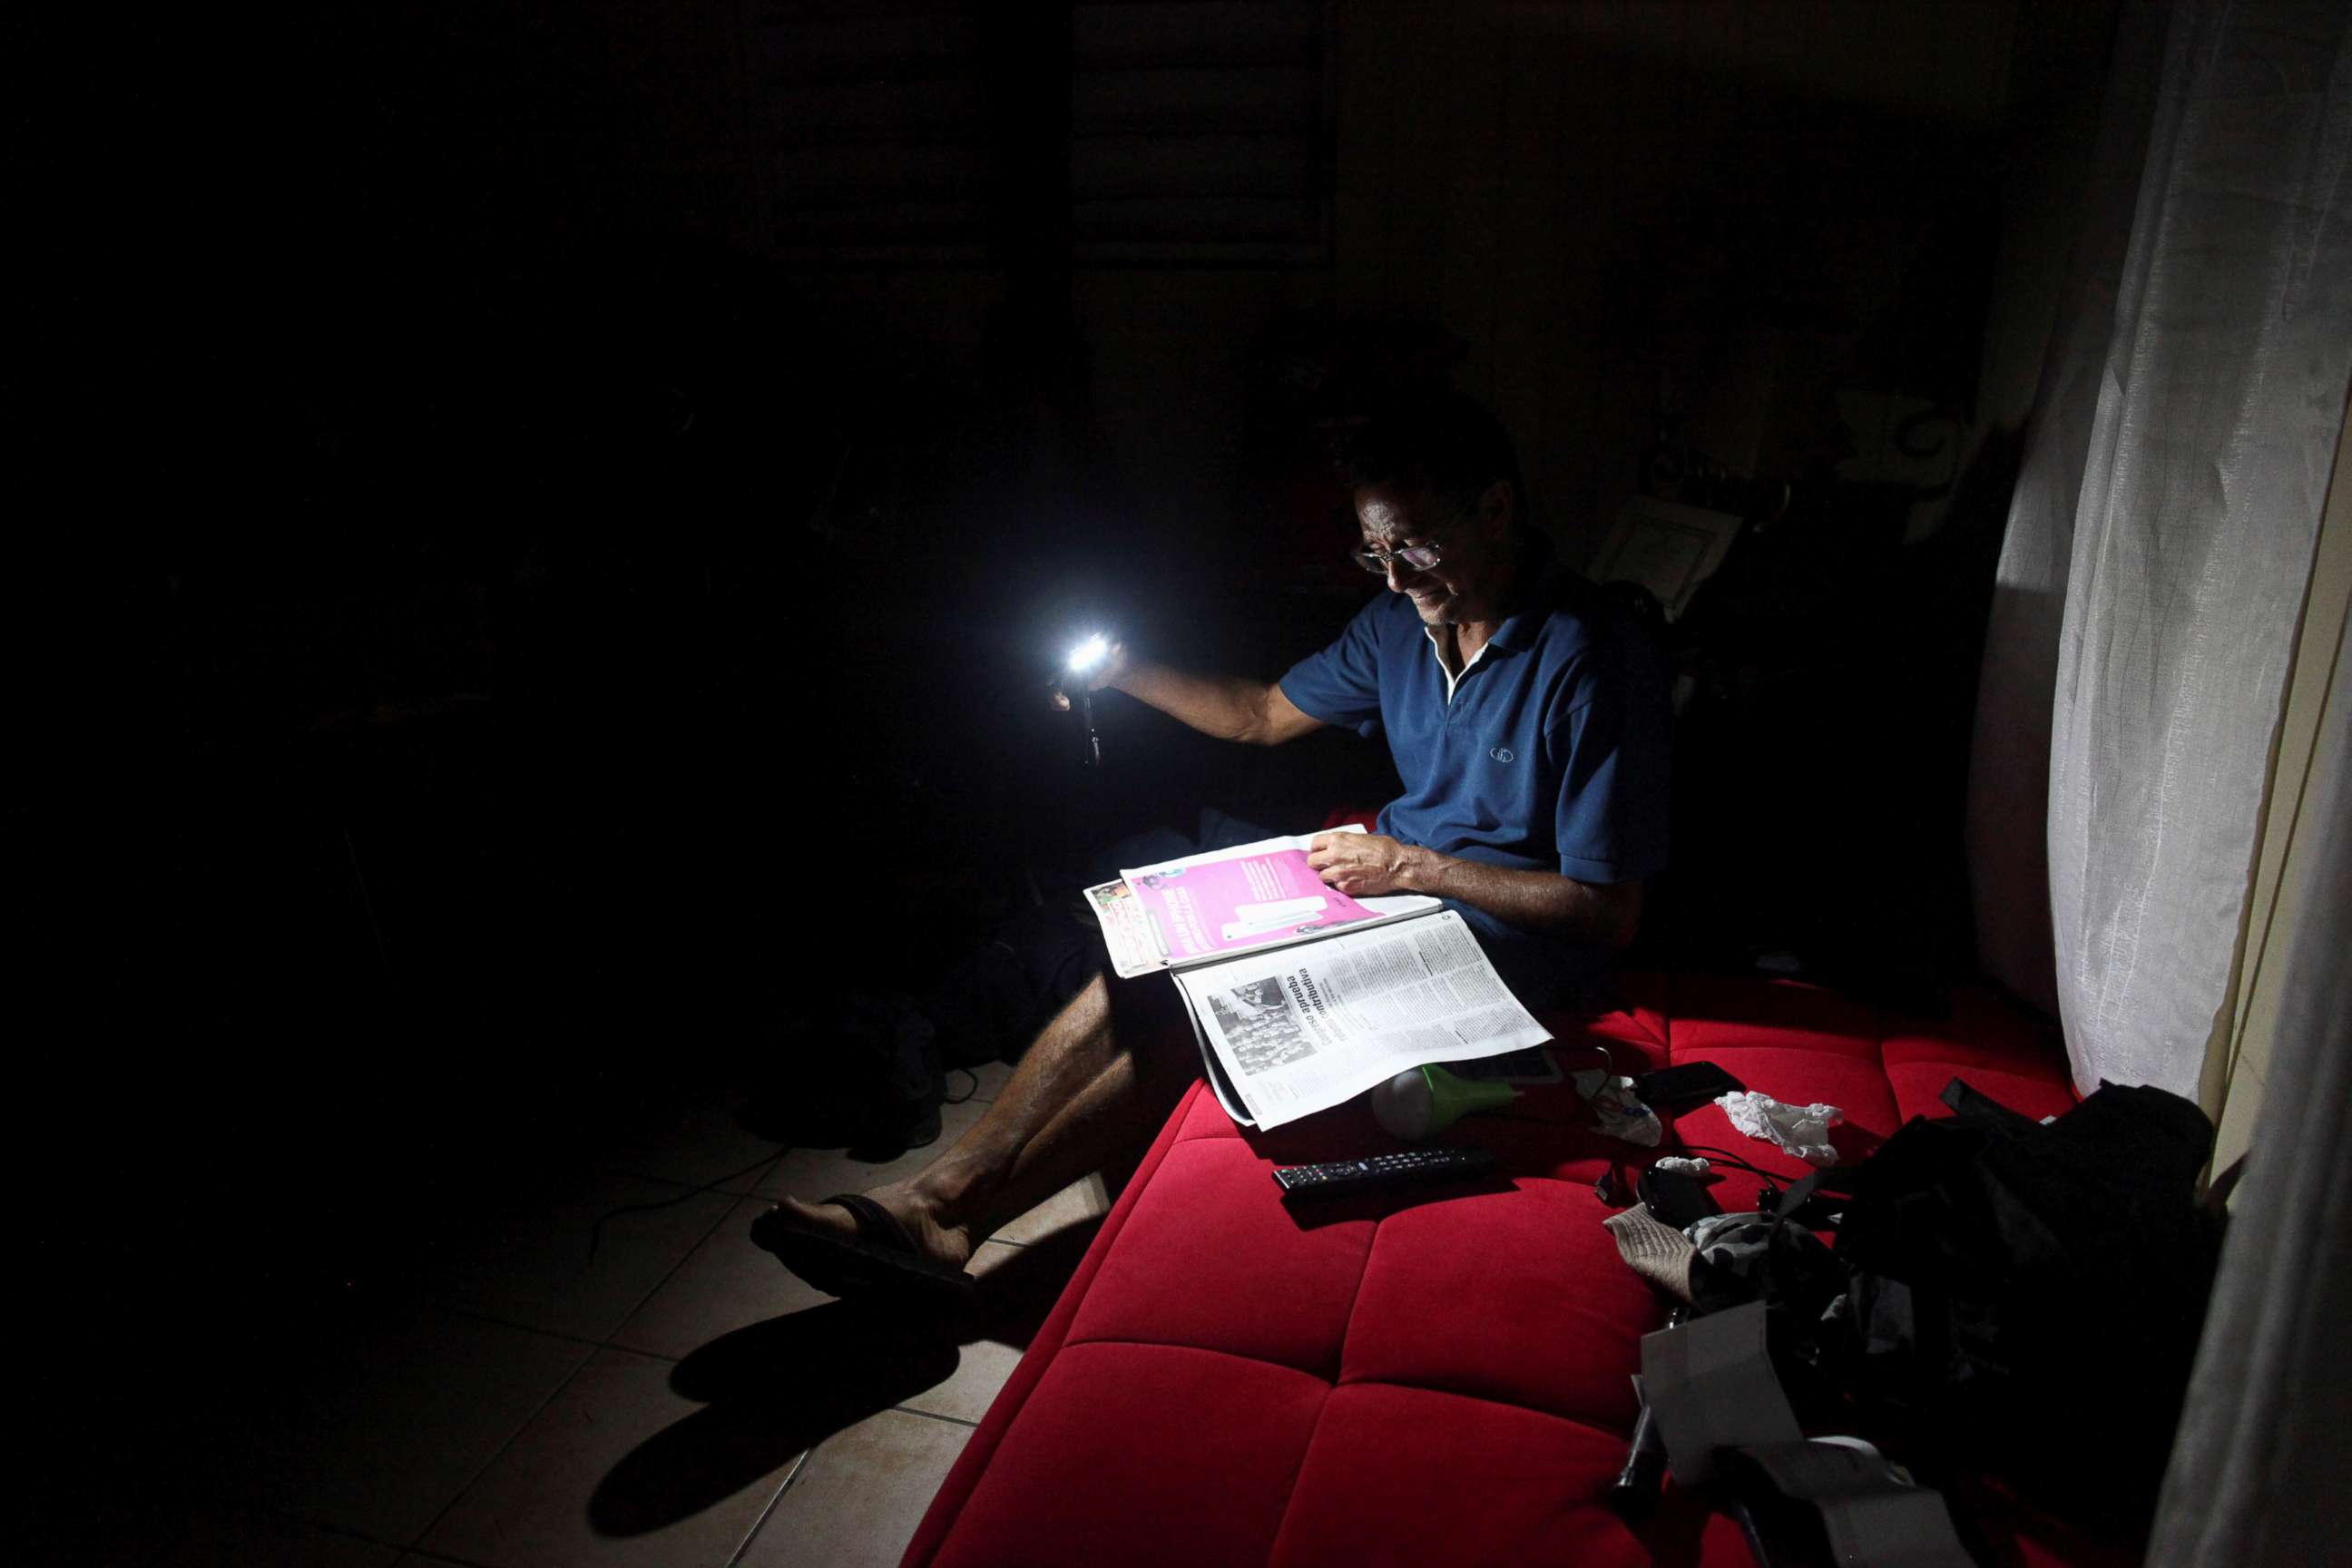 PHOTO: Hugo Regalado reads the newspaper with the help of a flashlight months after Hurricane Maria damaged the electrical grid in Dorado, Puerto Rico, Jan. 15, 2018.